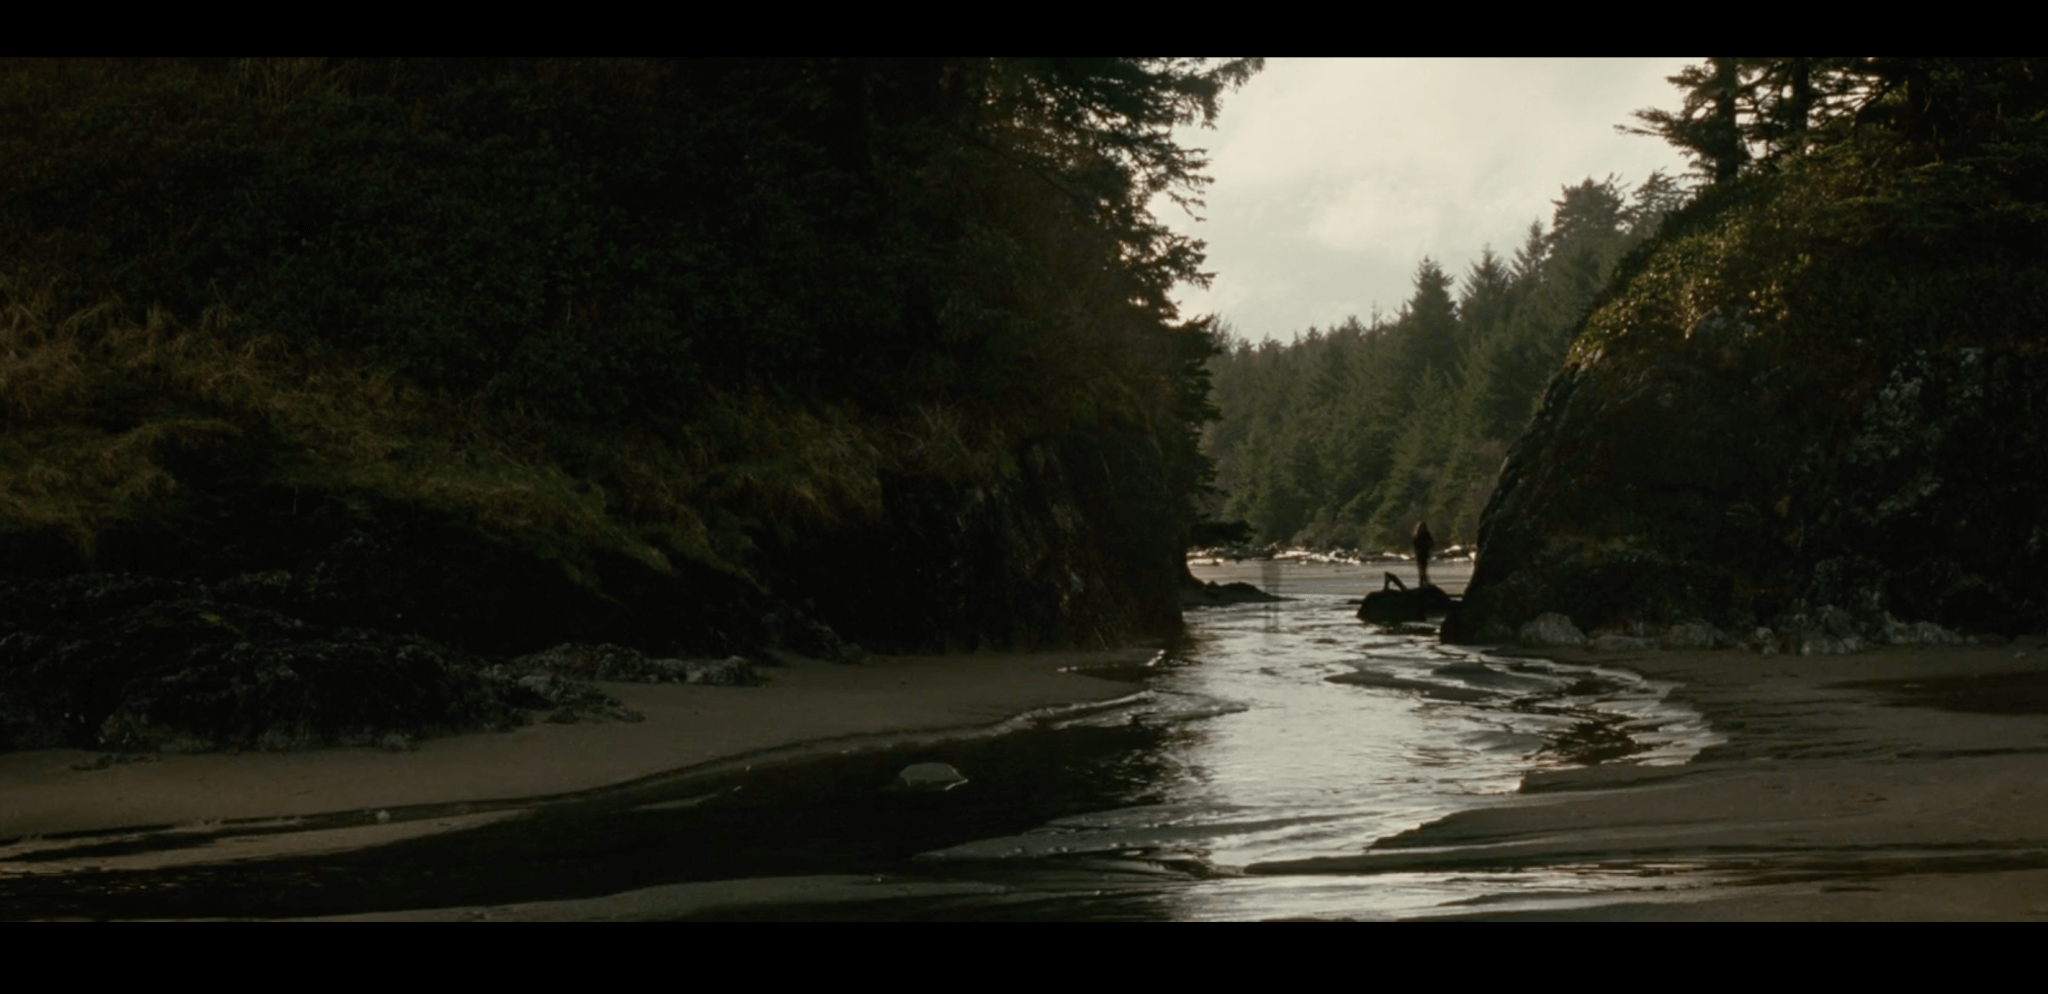 screenshot of Twilight movie location. Credit to Summit Entertainment. Image used for critique.